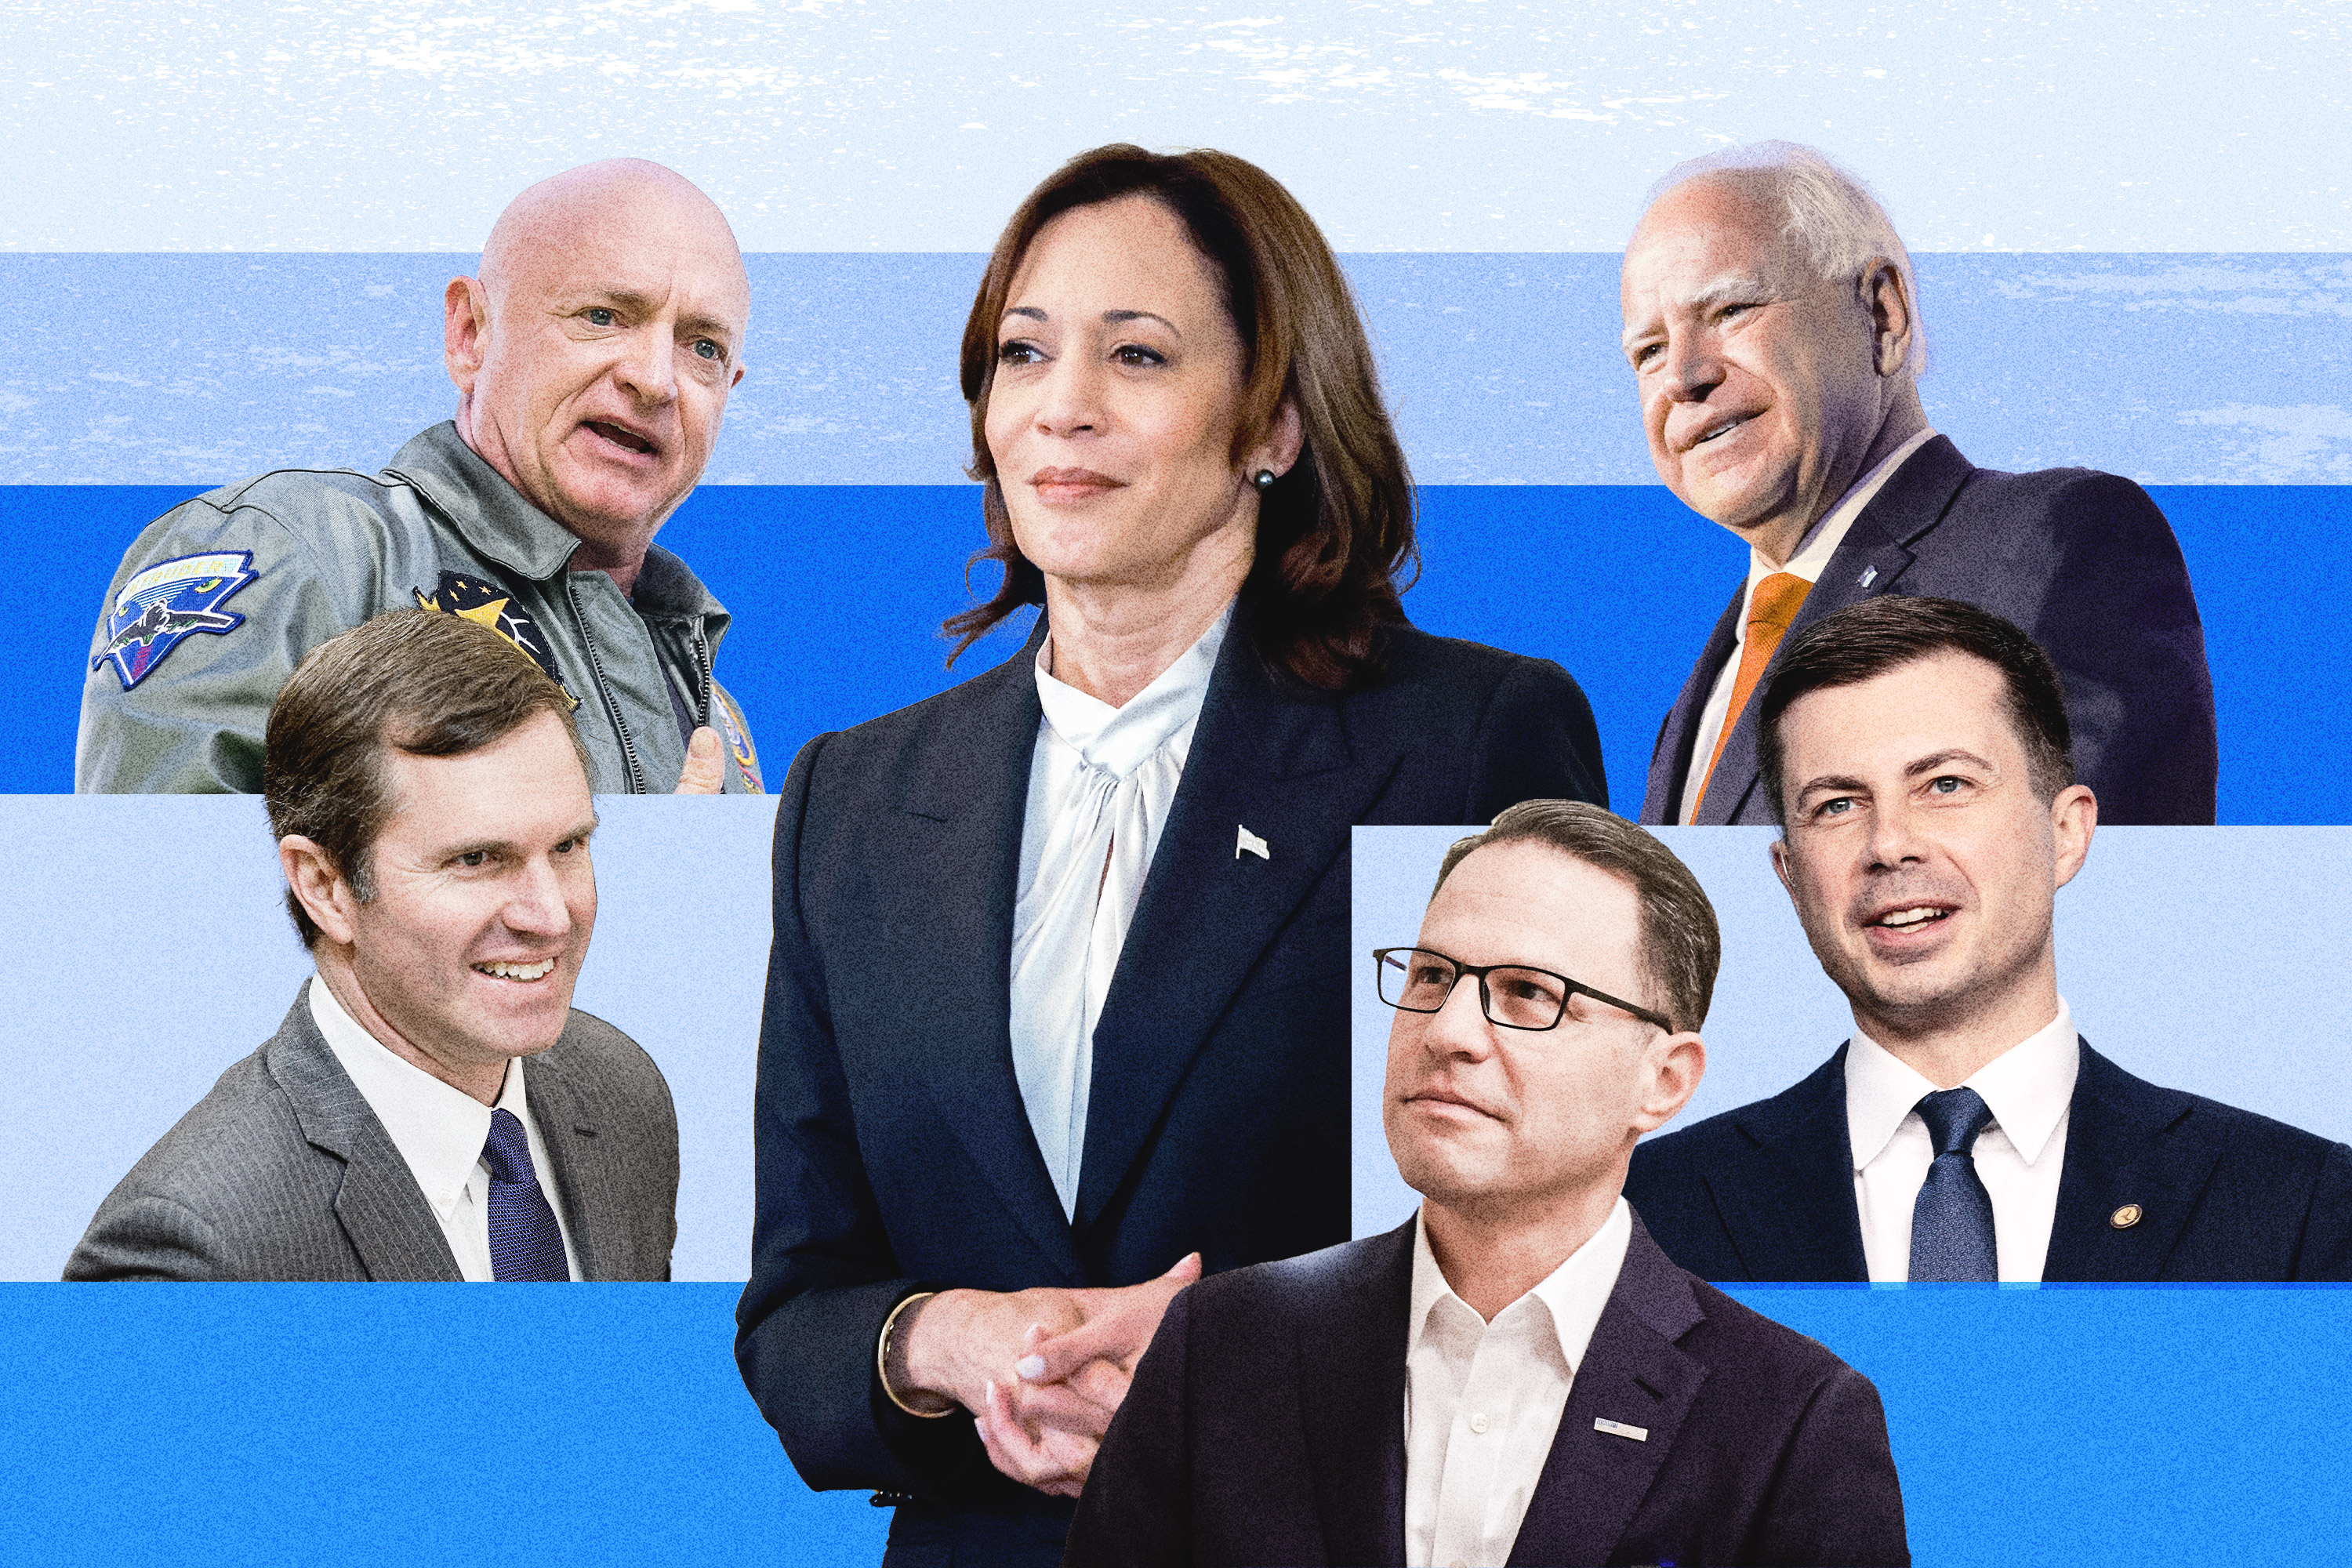 Harris to Reveal VP Pick This Week—Here’s the Short List